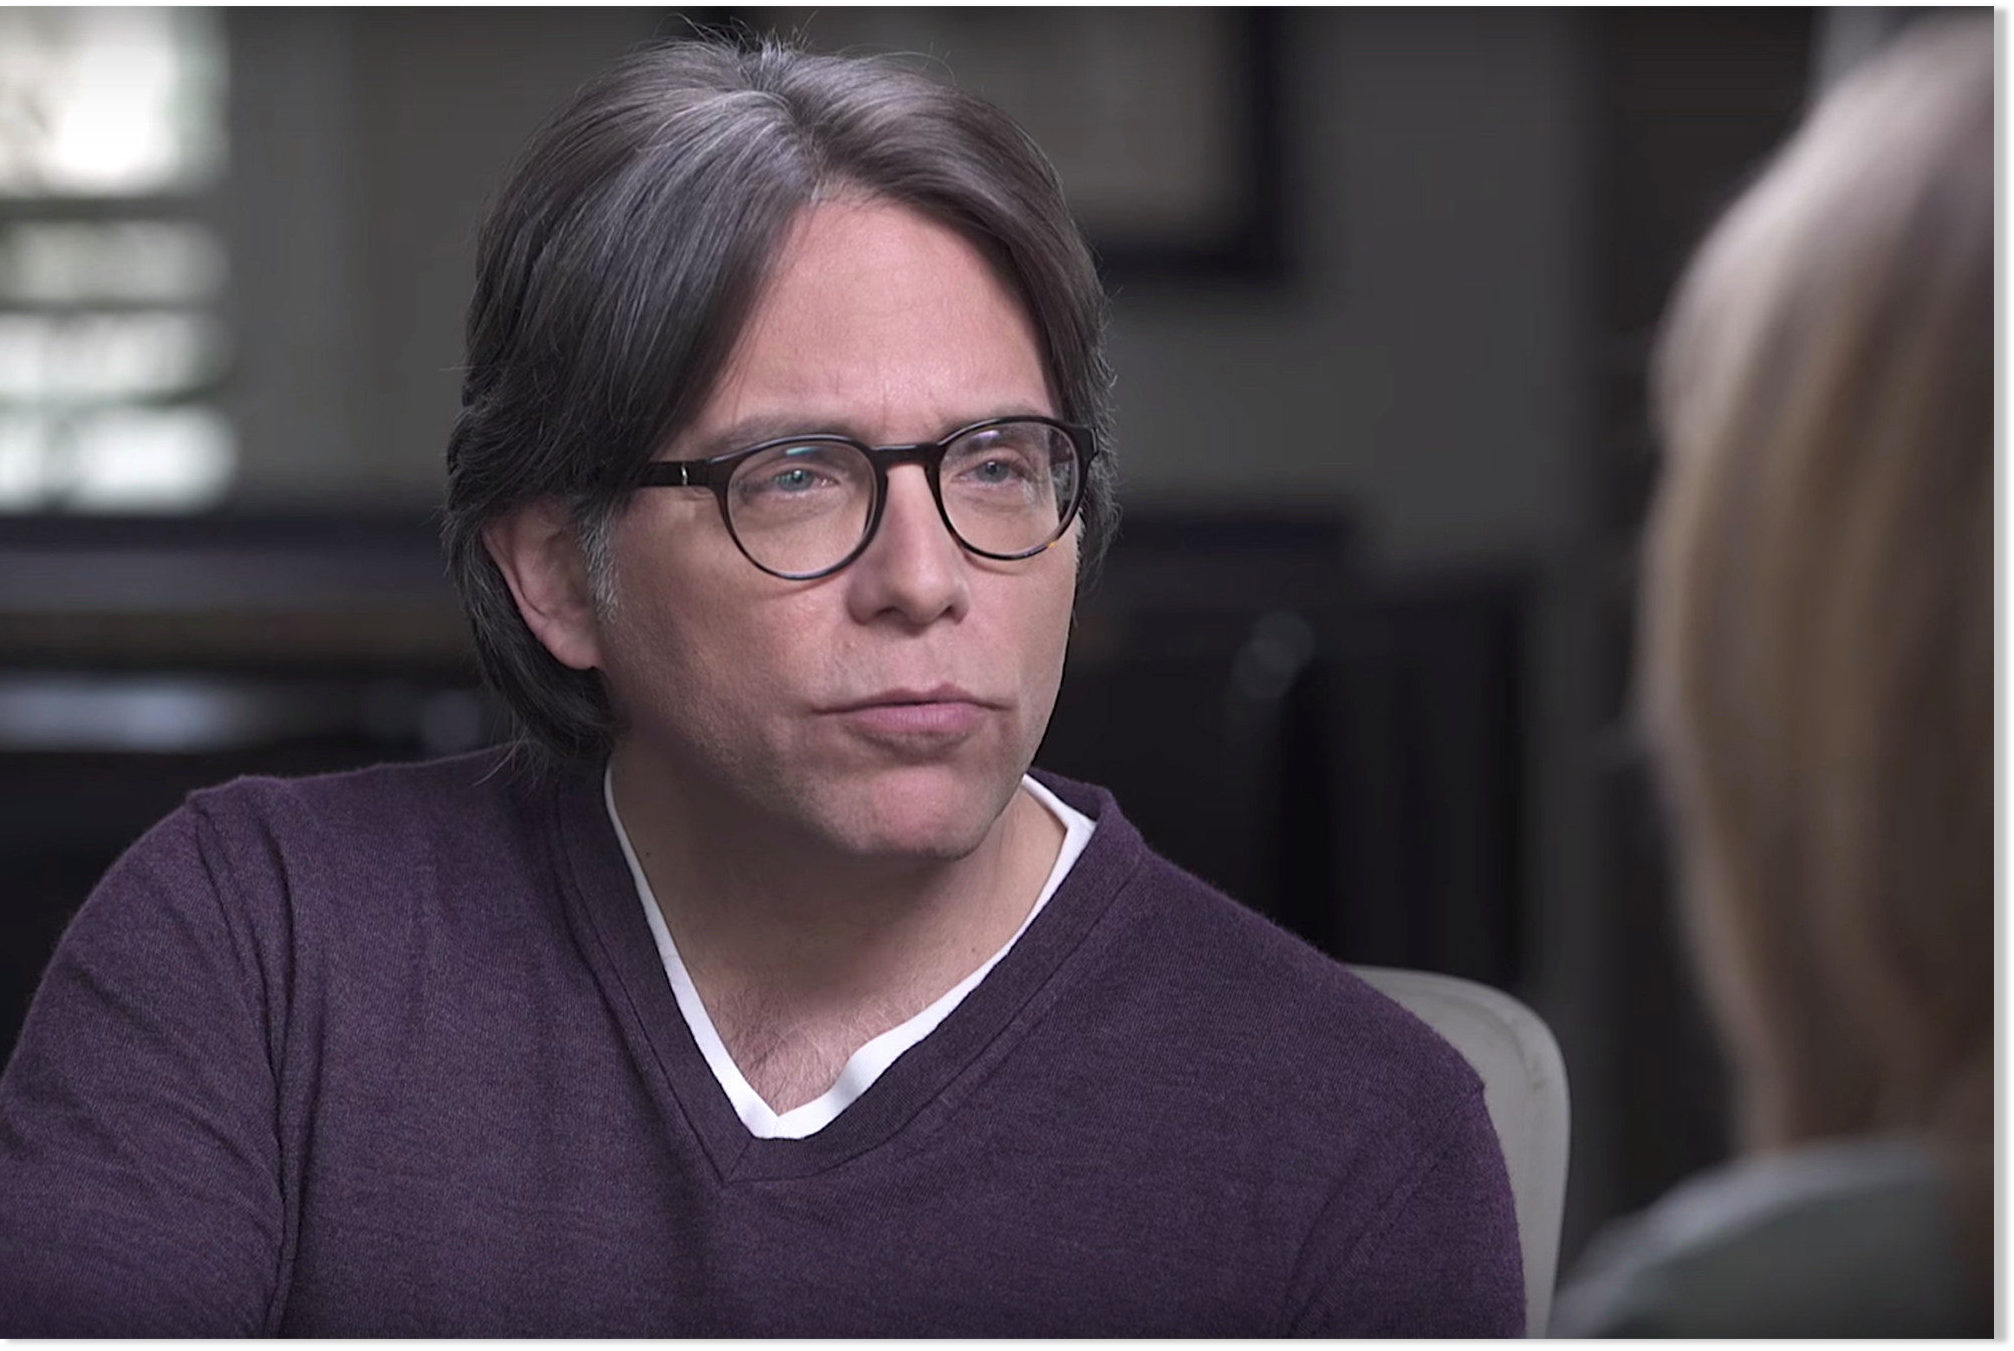 Russian Toddler Porn 3d - New indictment reveals NXIVM leader Keith Raniere had sex ...